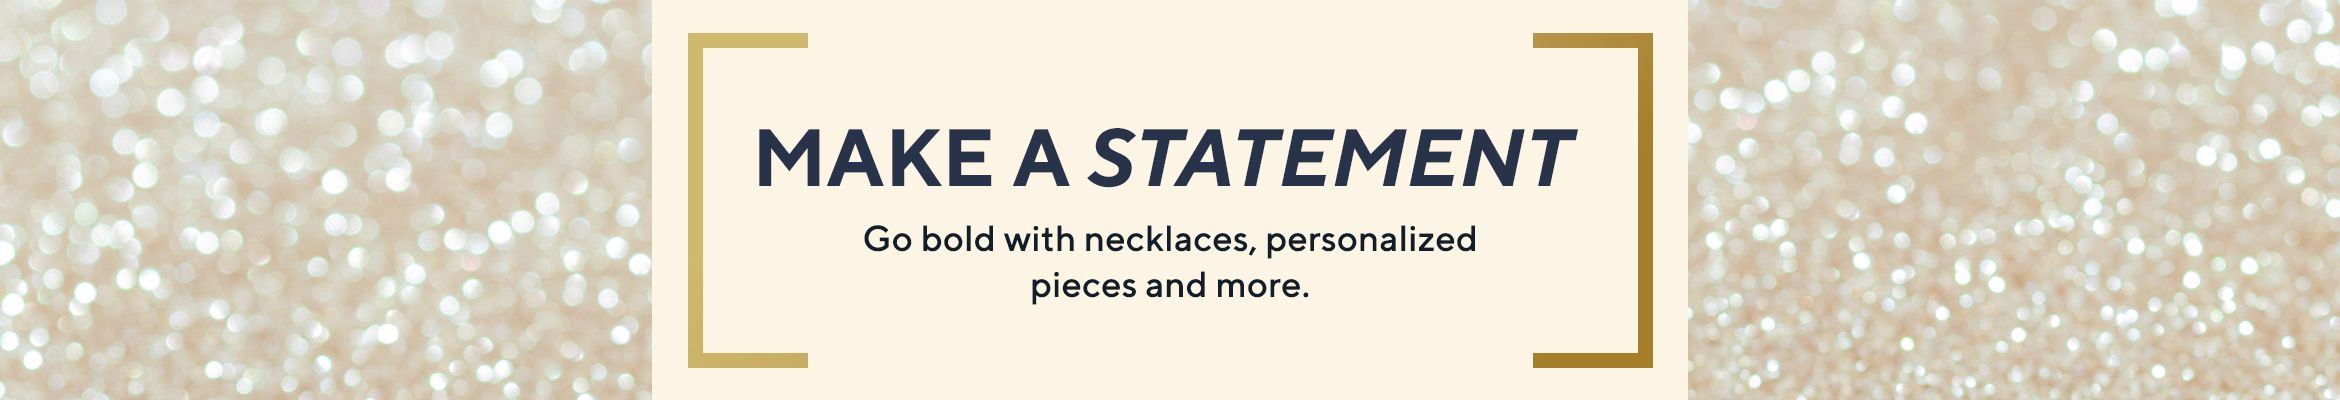 Make a Statement - Go bold with necklaces, personalized pieces & more.